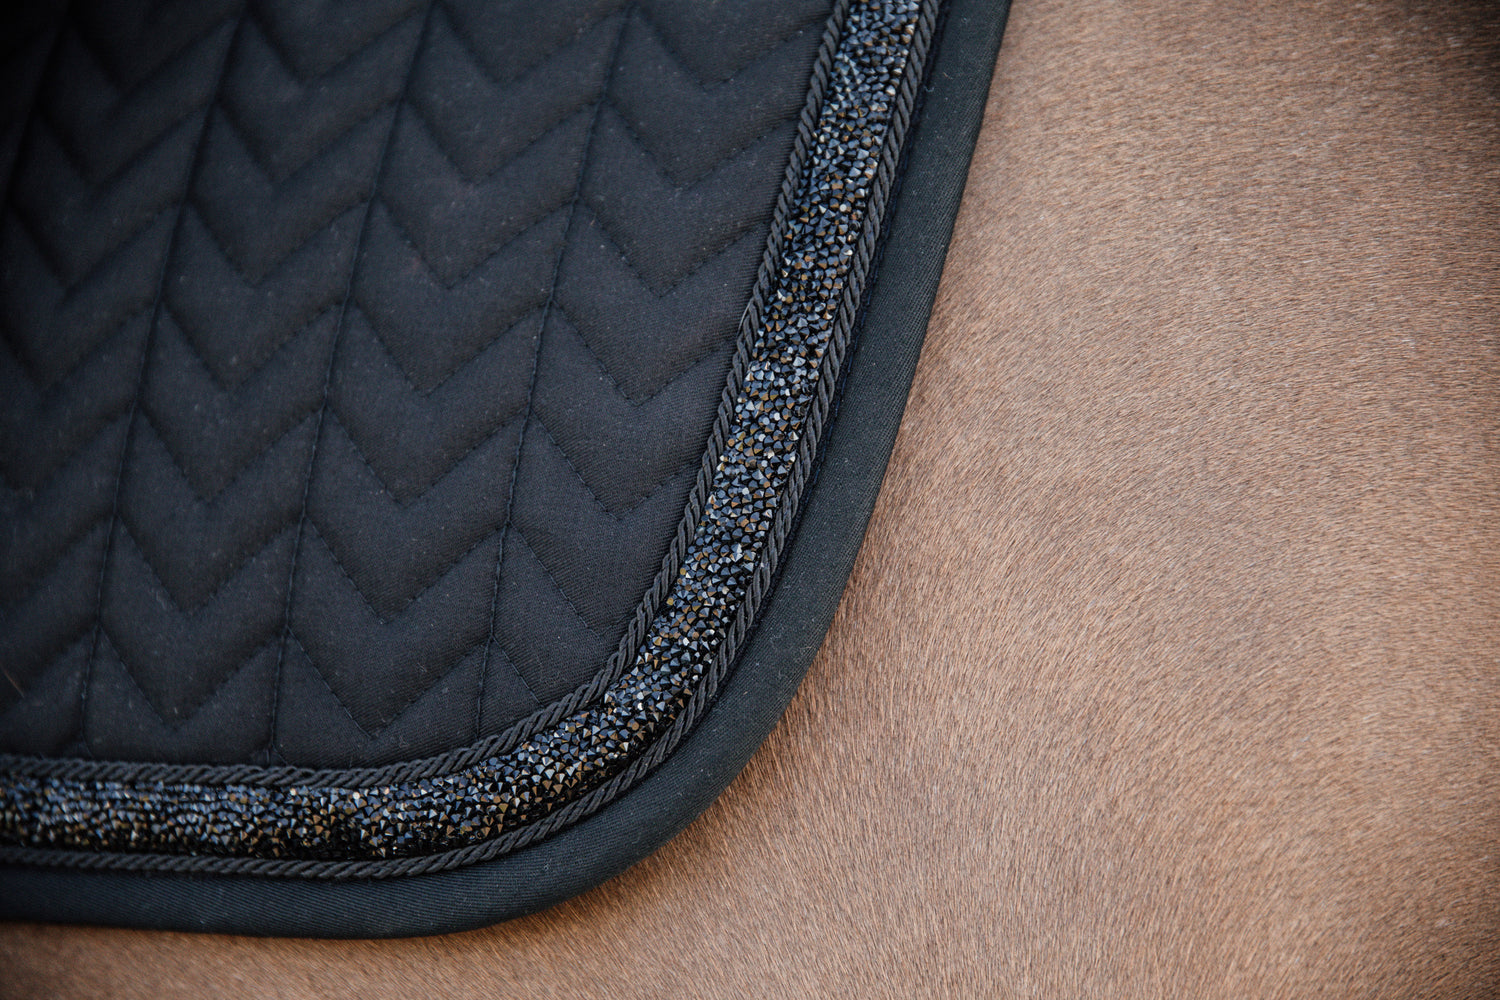 Kentucky’s Saddle Pad Glitter Stone jumping pad is stunning. The stones ooze sophistication and style. The pad is shaped for jumping and provides excellent cushioning between the horse while protecting against friction. 